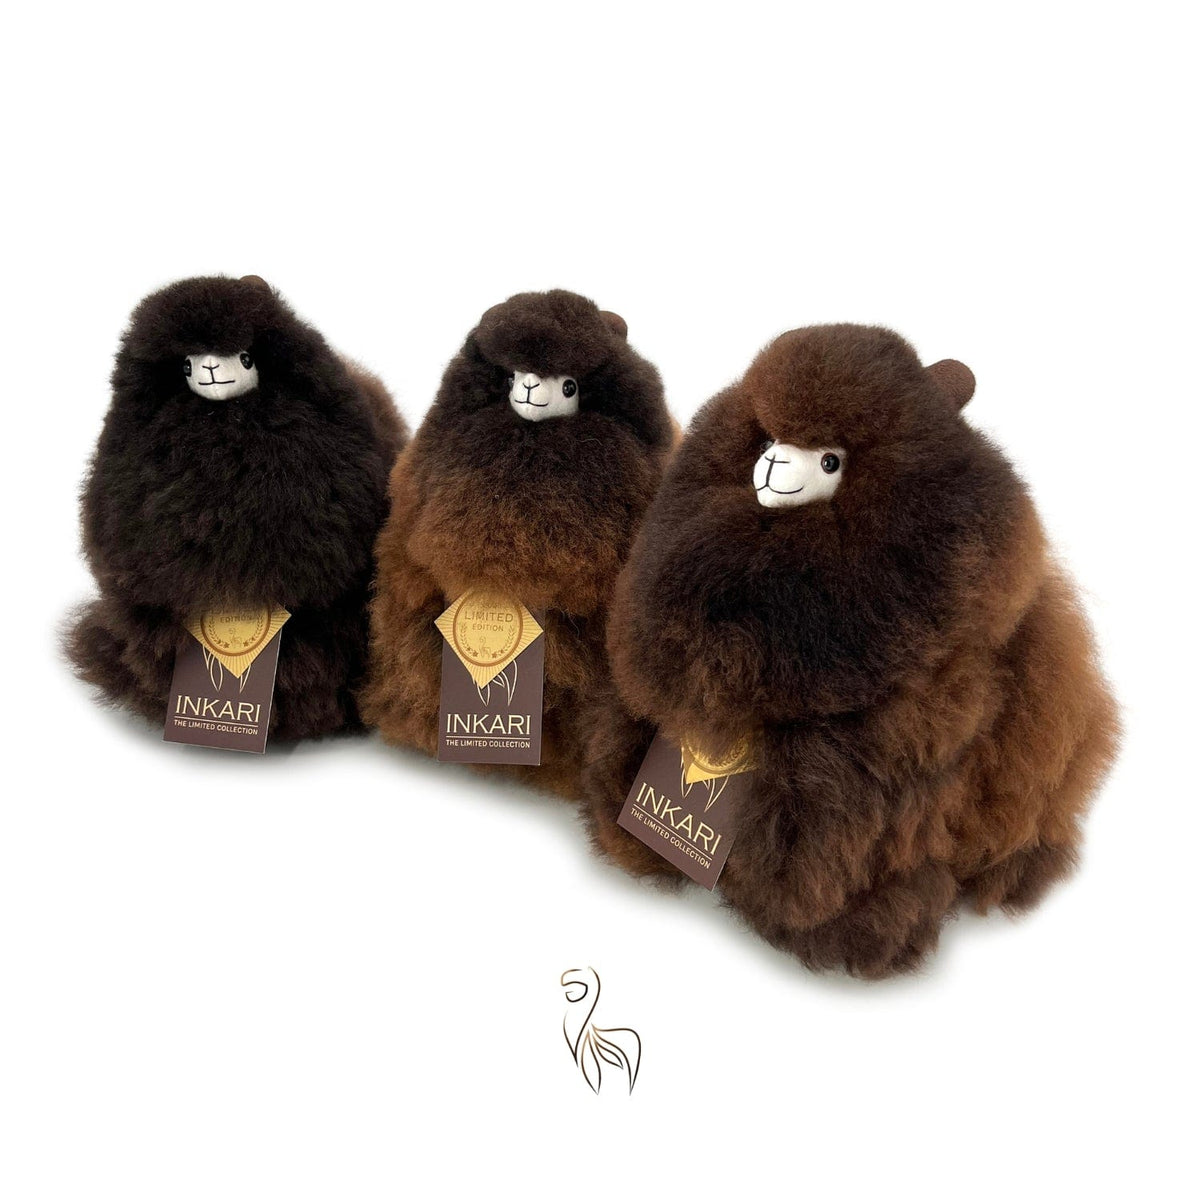 Cacao - Small Alpaca Toy (23cm) - Limited Edition